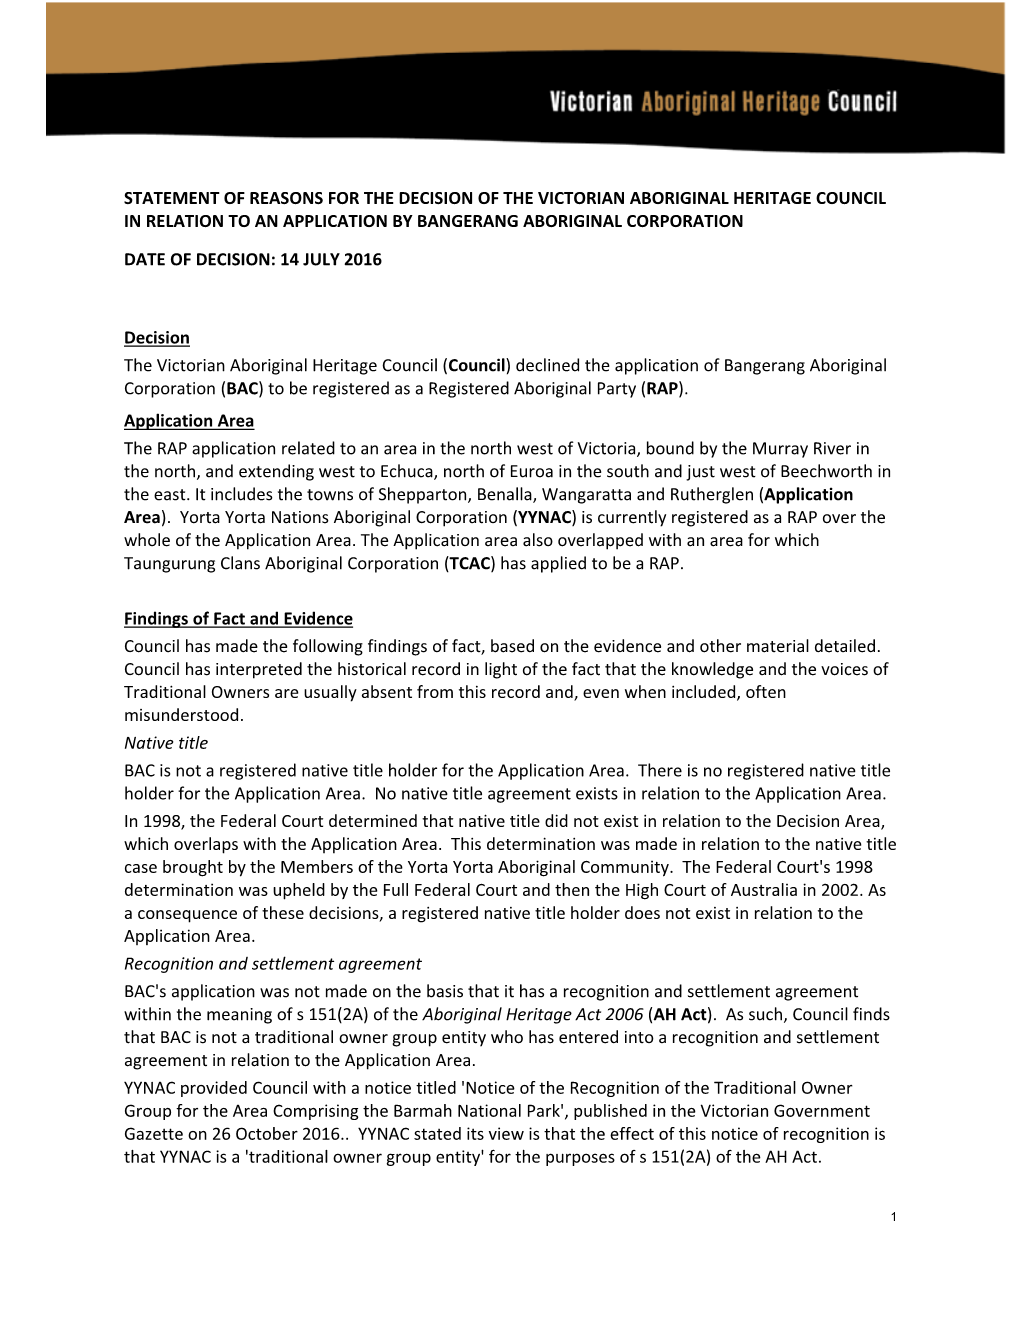 Statement of Reasons for the Decision of the Victorian Aboriginal Heritage Council in Relation to an Application by Bangerang Aboriginal Corporation